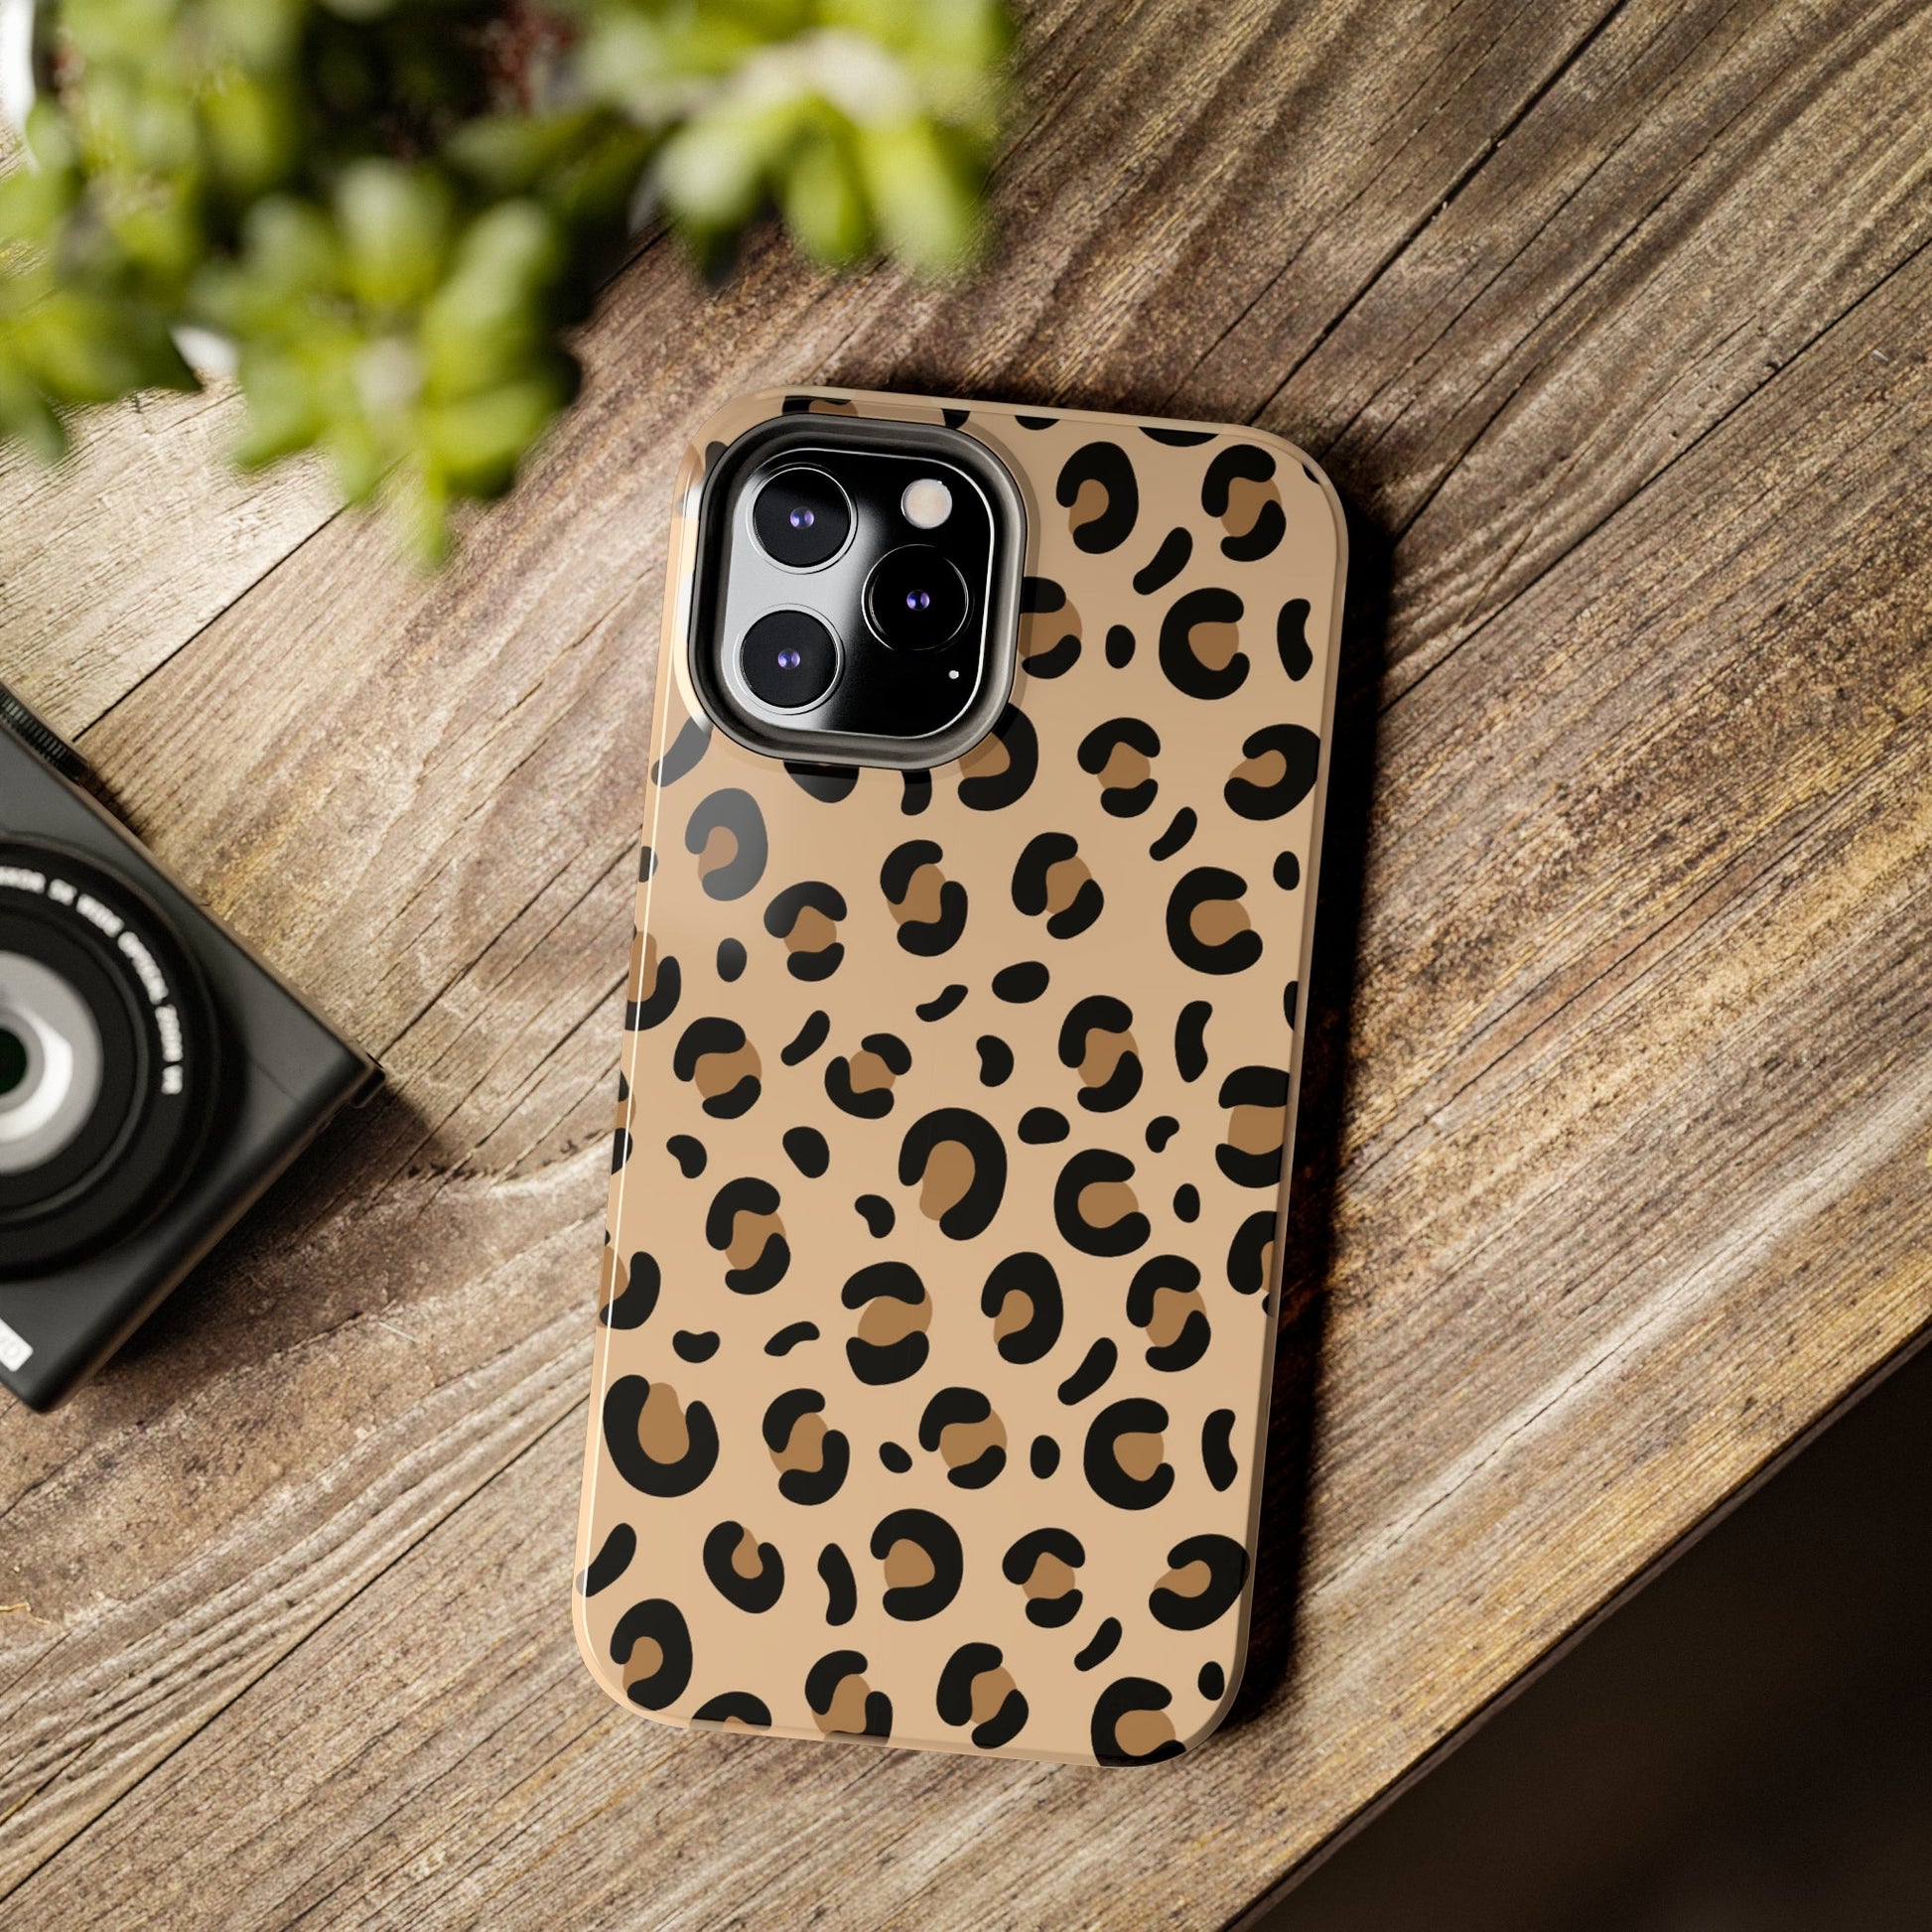 Leopard Print Stylish Cell Phone Case - Trendy and Fashionable Cover - Eddy and Rita